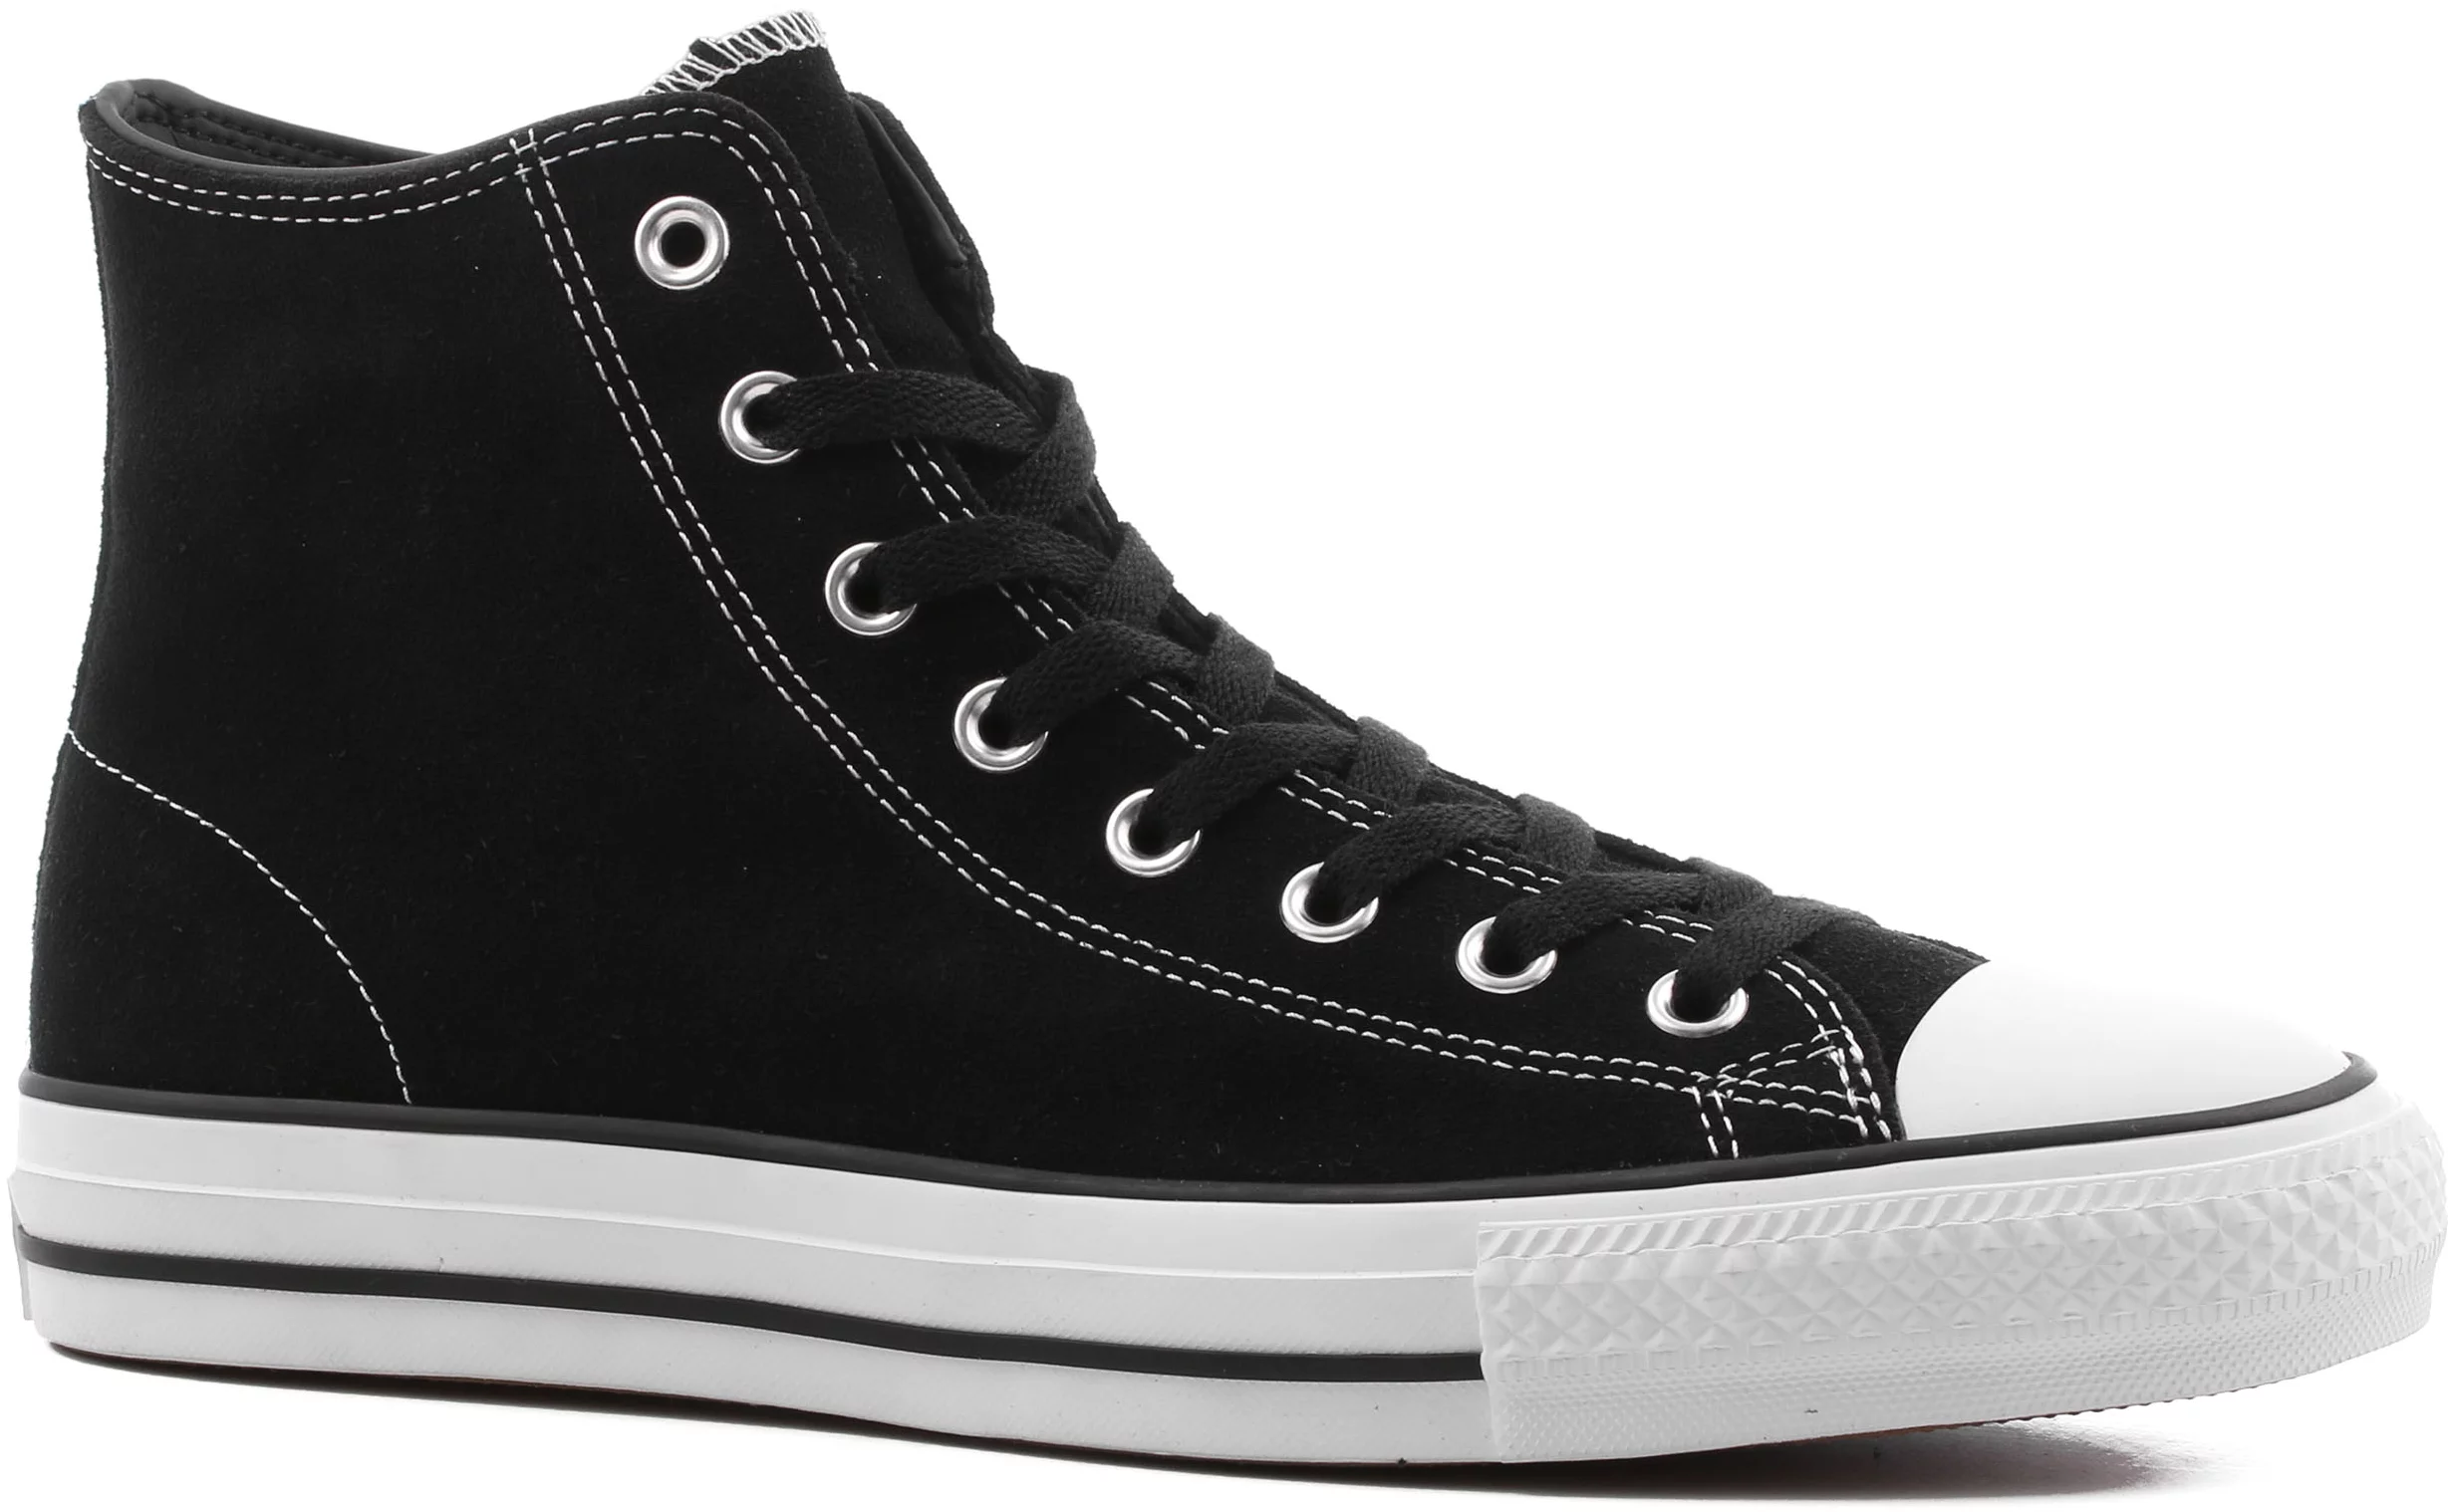 Fabriek Editor eerlijk Converse Chuck Taylor All Star Pro High Skate Shoes - (suede)  black/black/white - Free Shipping | Tactics